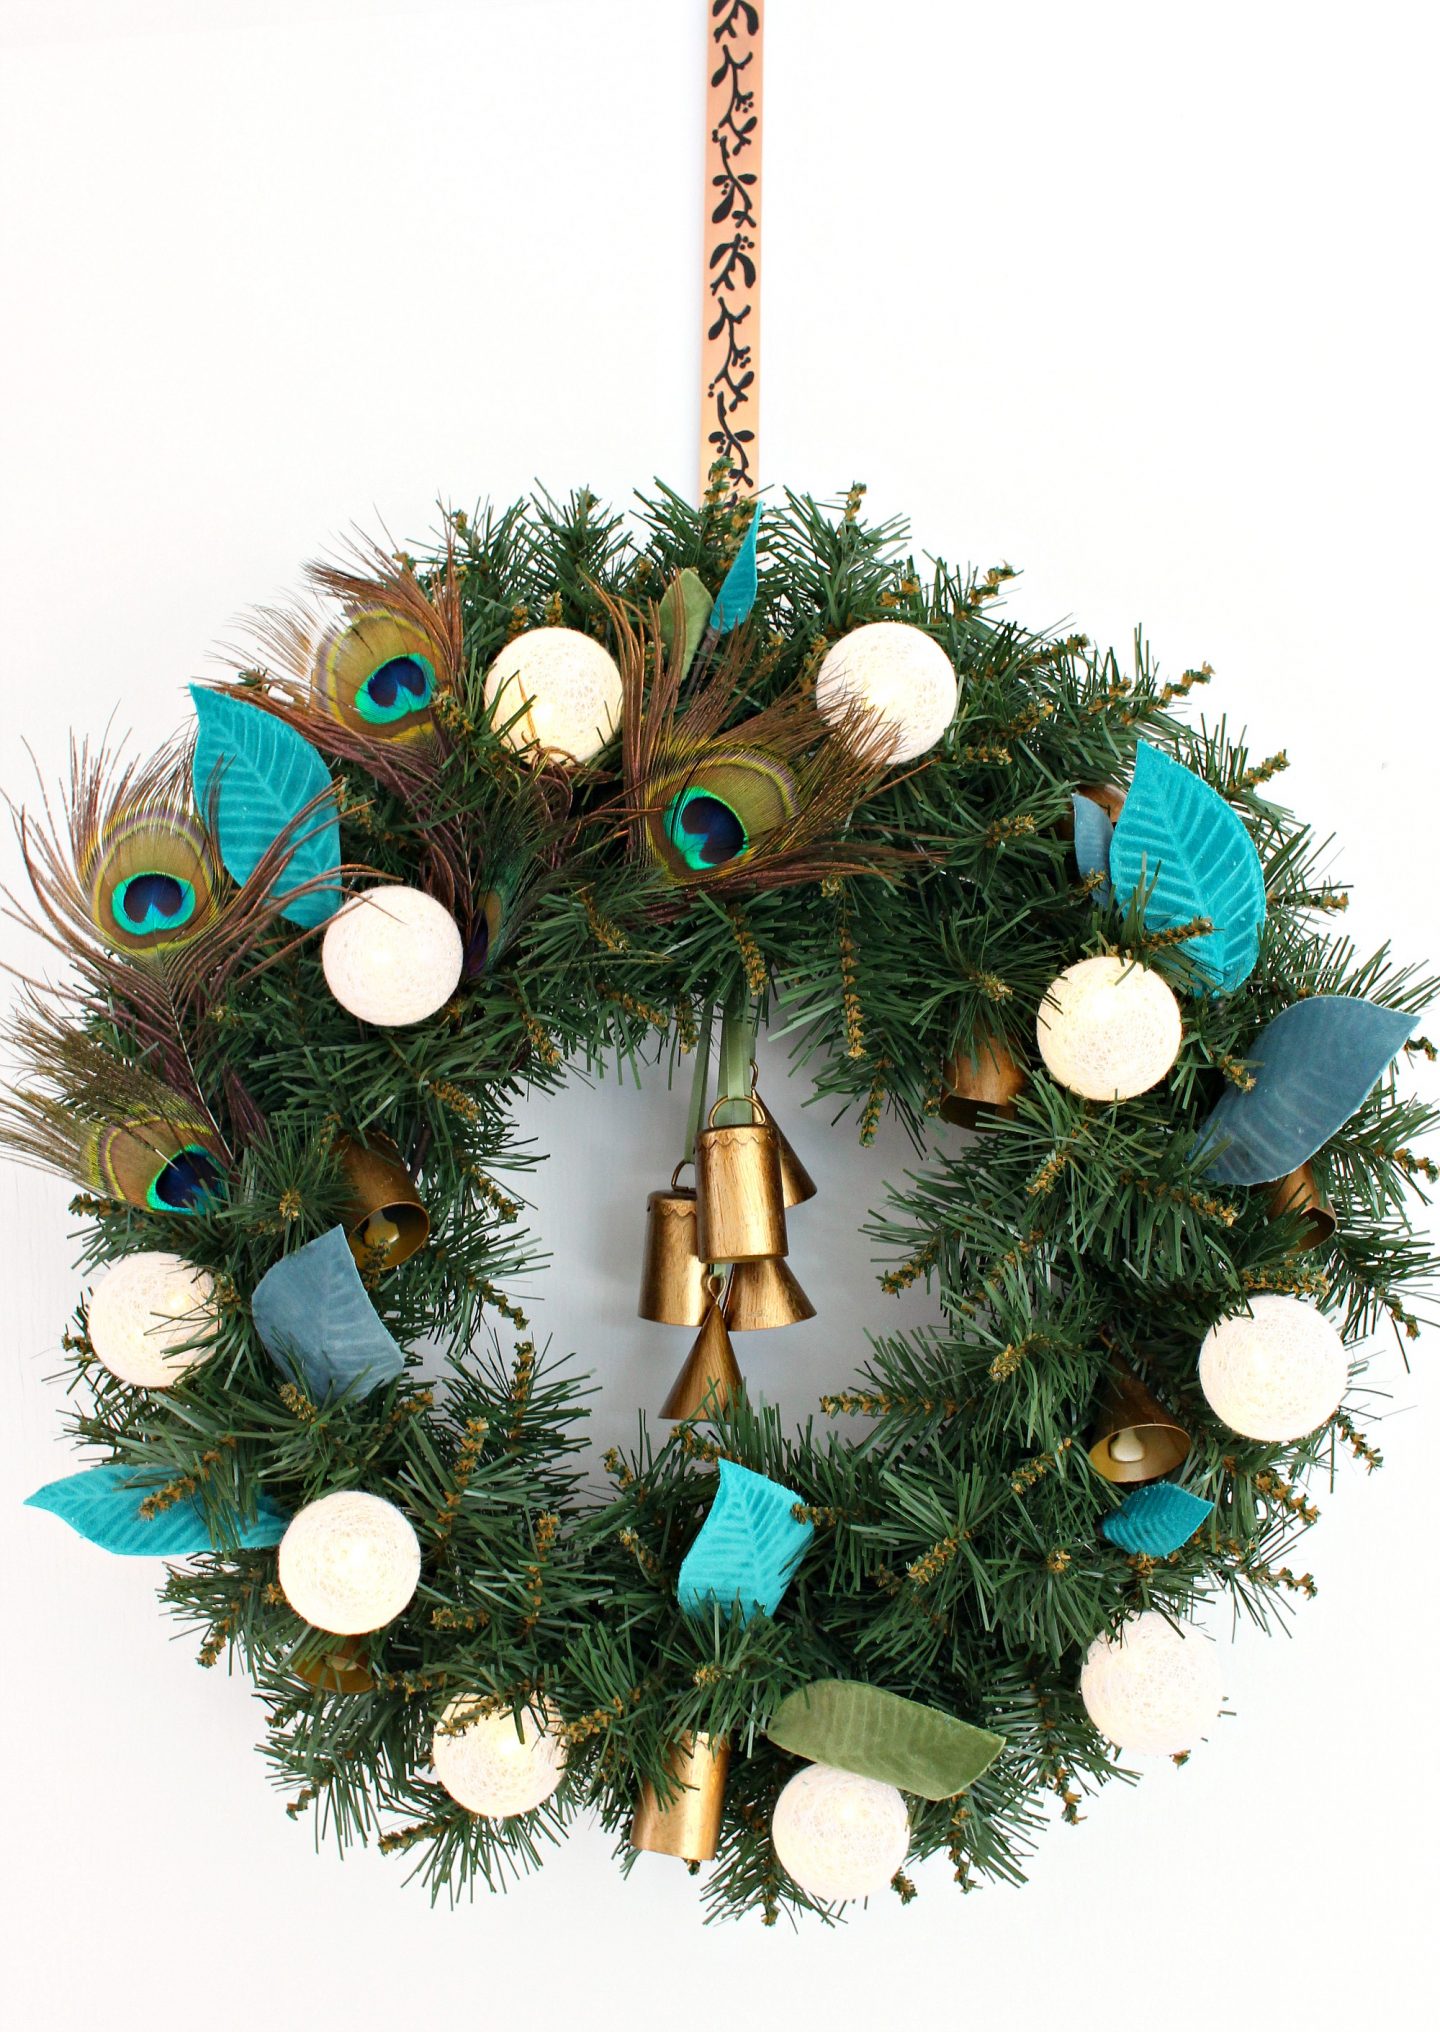 DIY boho lux Christmas wreath with peacock feathers and bells (via www.danslelakehouse.com)